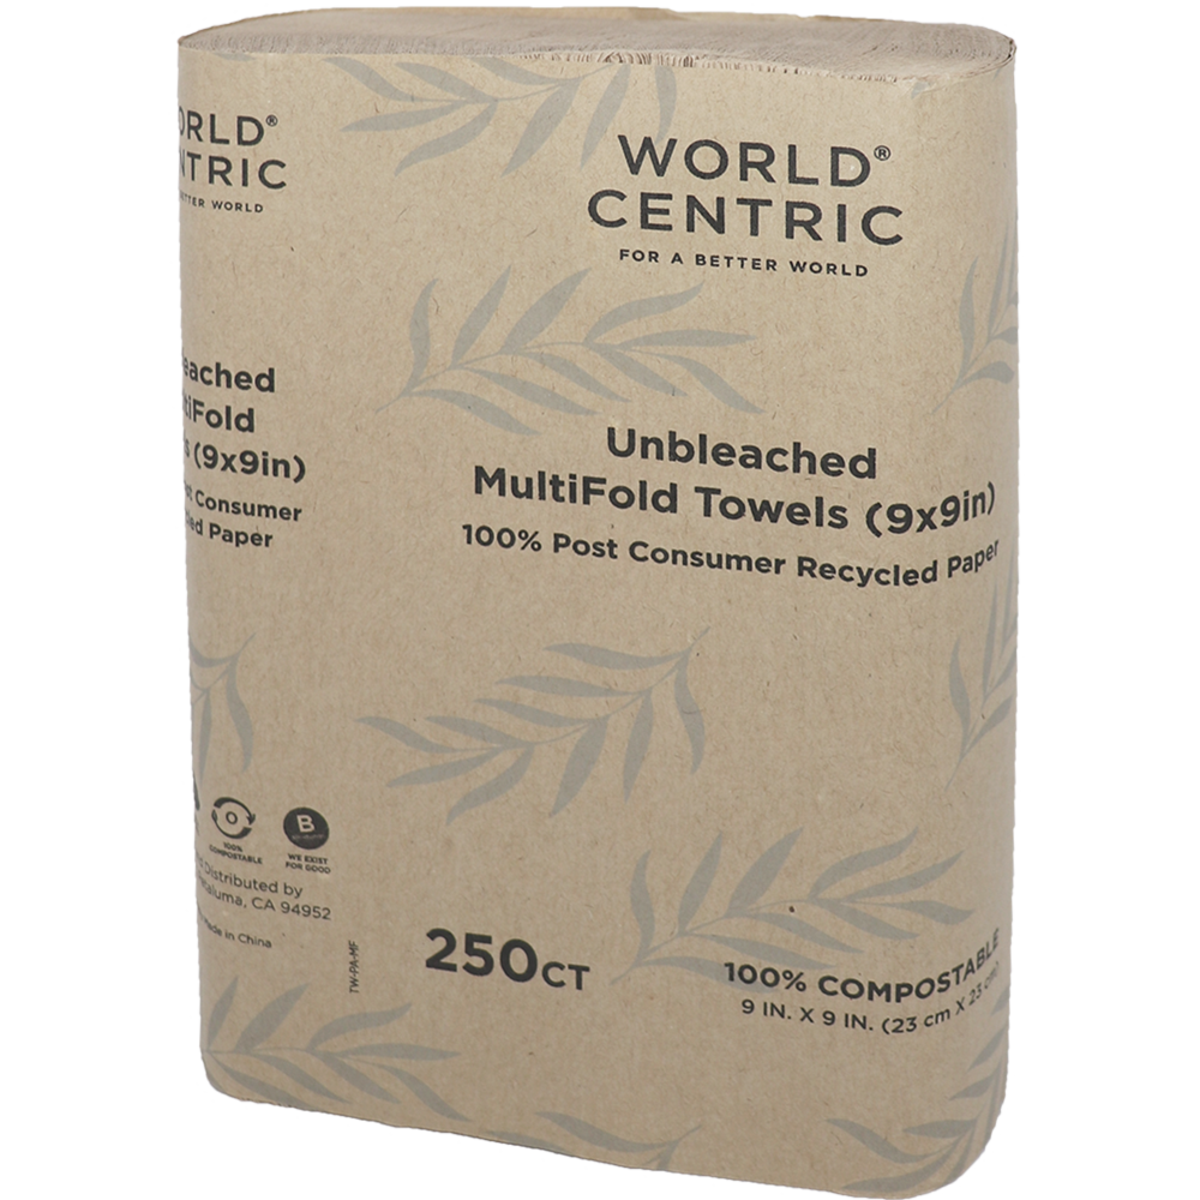 World Centric MultiFold Towels, 3x9 in (1-ply) (SKU: TW-PA-MF)